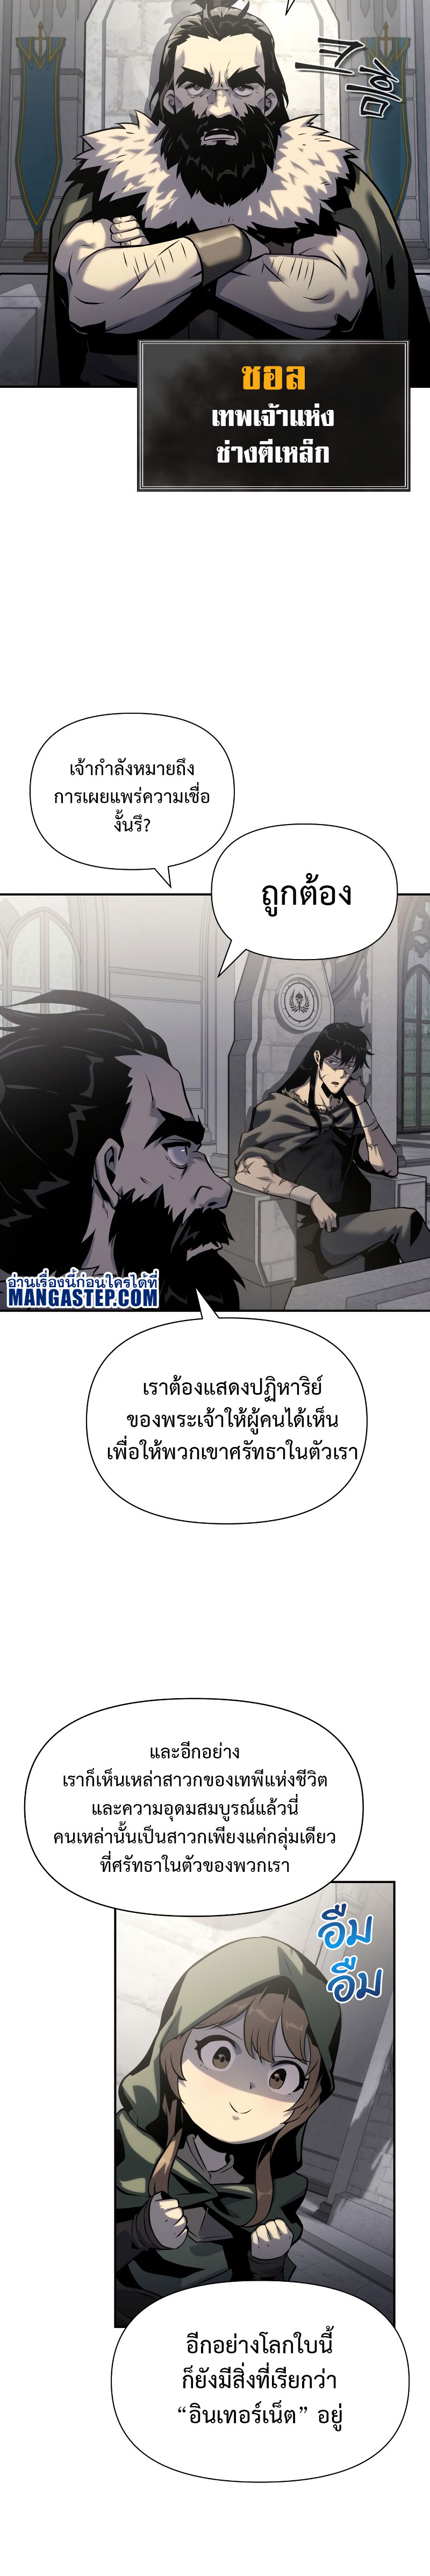 The Knight King 17 (15)